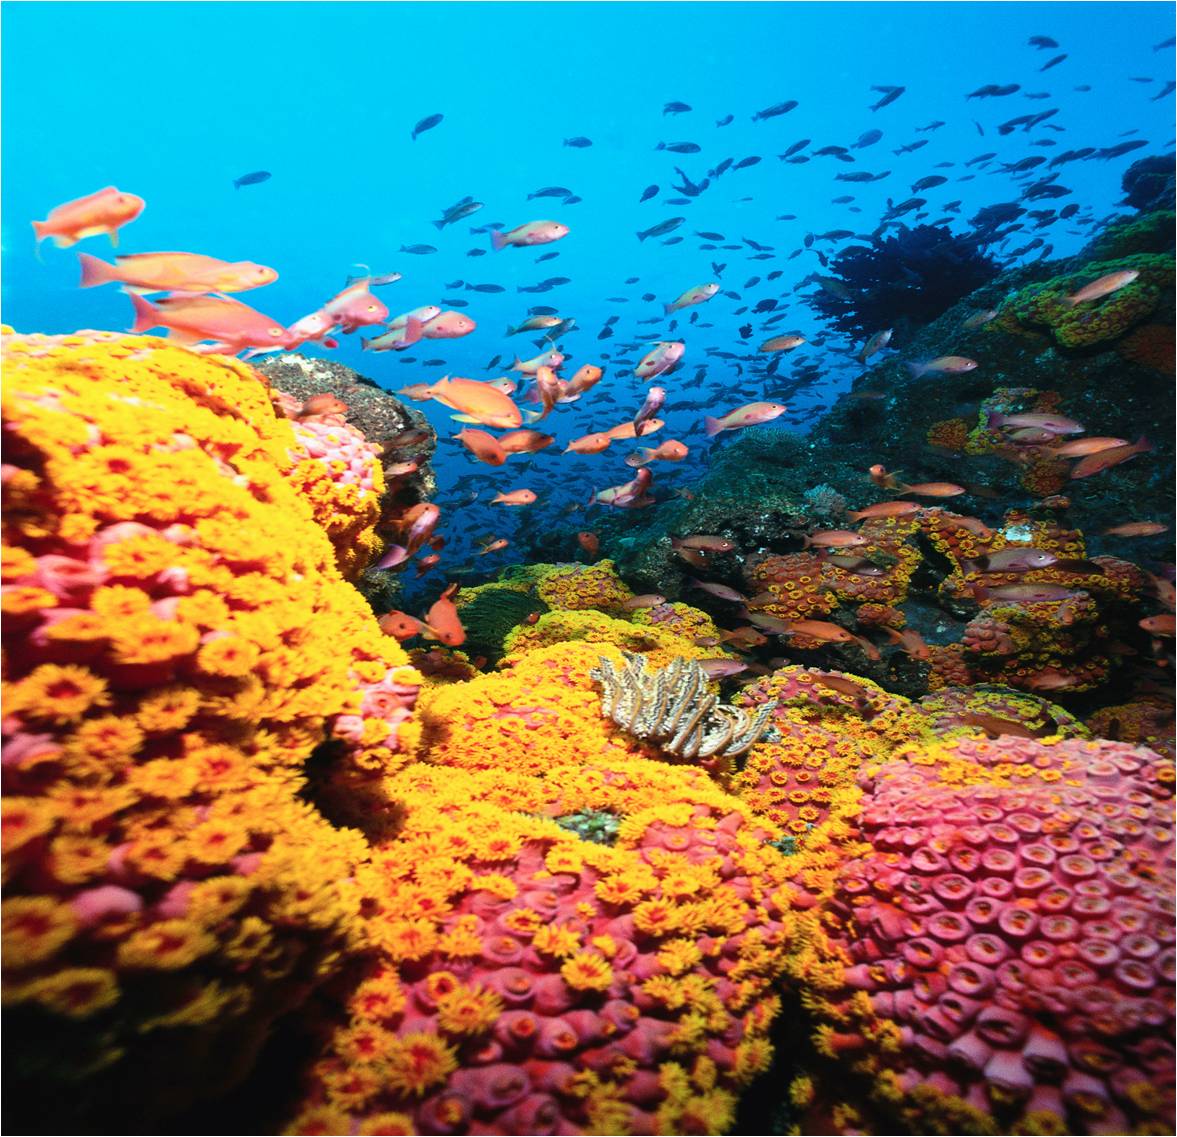  so get free download coral reef wallpapers and make your desktop cool